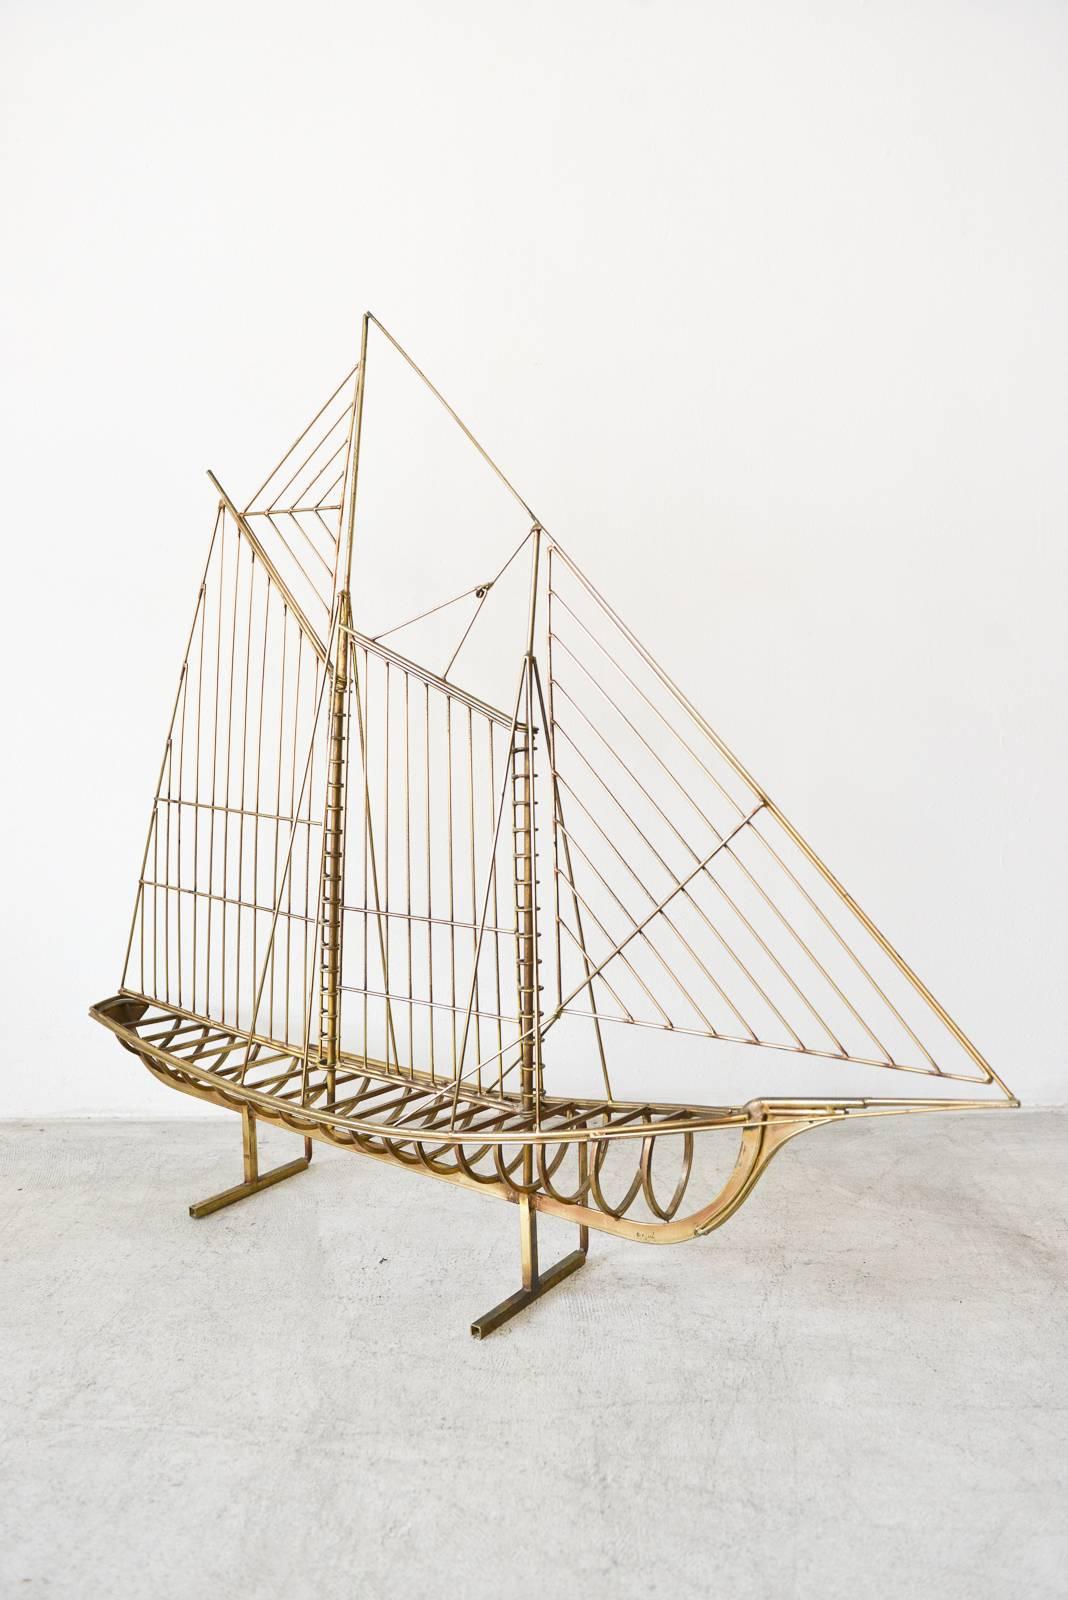 Sculptural brass sailboat by Curtis Jere, circa 1970. Beautiful modern sailboat on floating base. Excellent condition, signed. Original vintage patina. Great nautical design for your home or office.

Measures 41